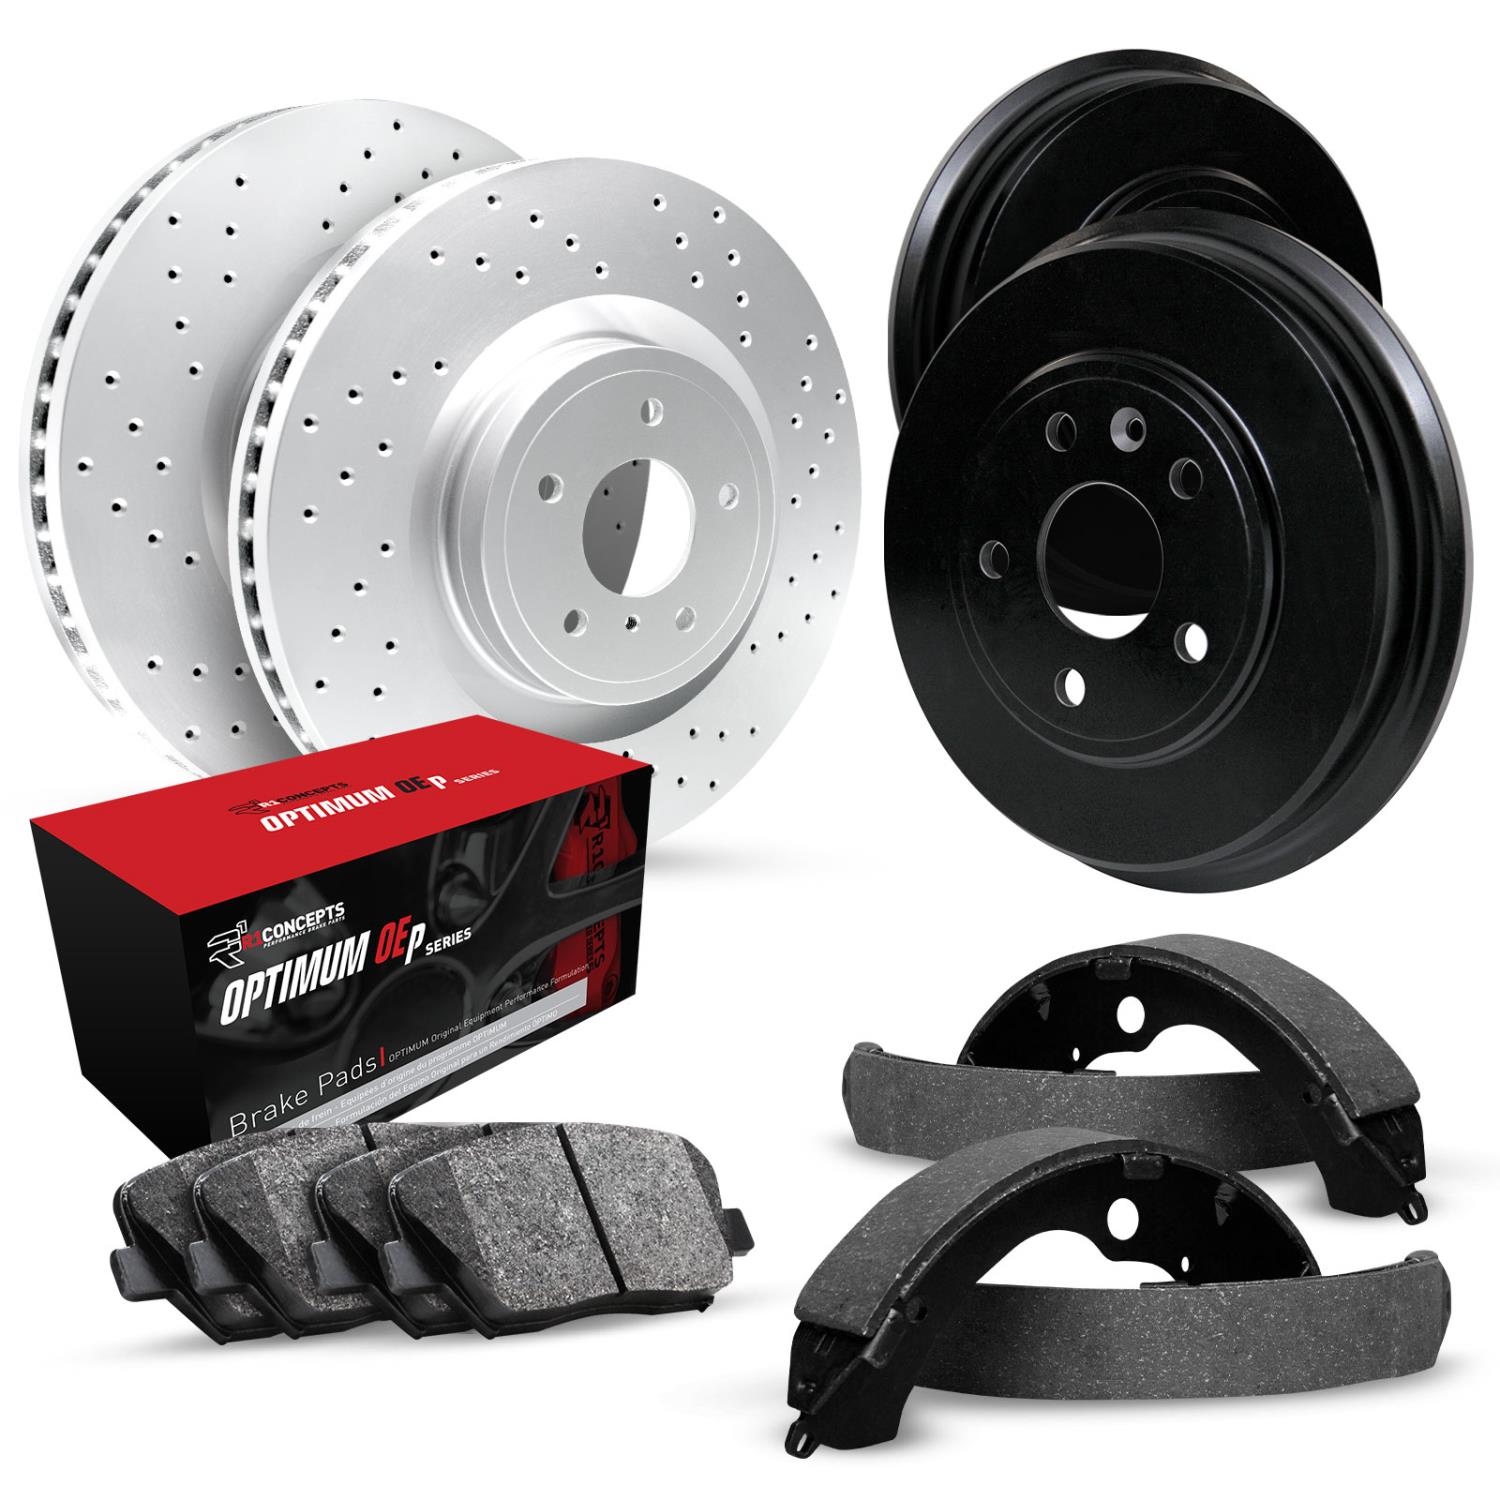 GEO-Carbon Drilled Brake Rotor & Drum Set w/Optimum OE Pads & Shoes, 1995-2001 GM, Position: Front & Rear